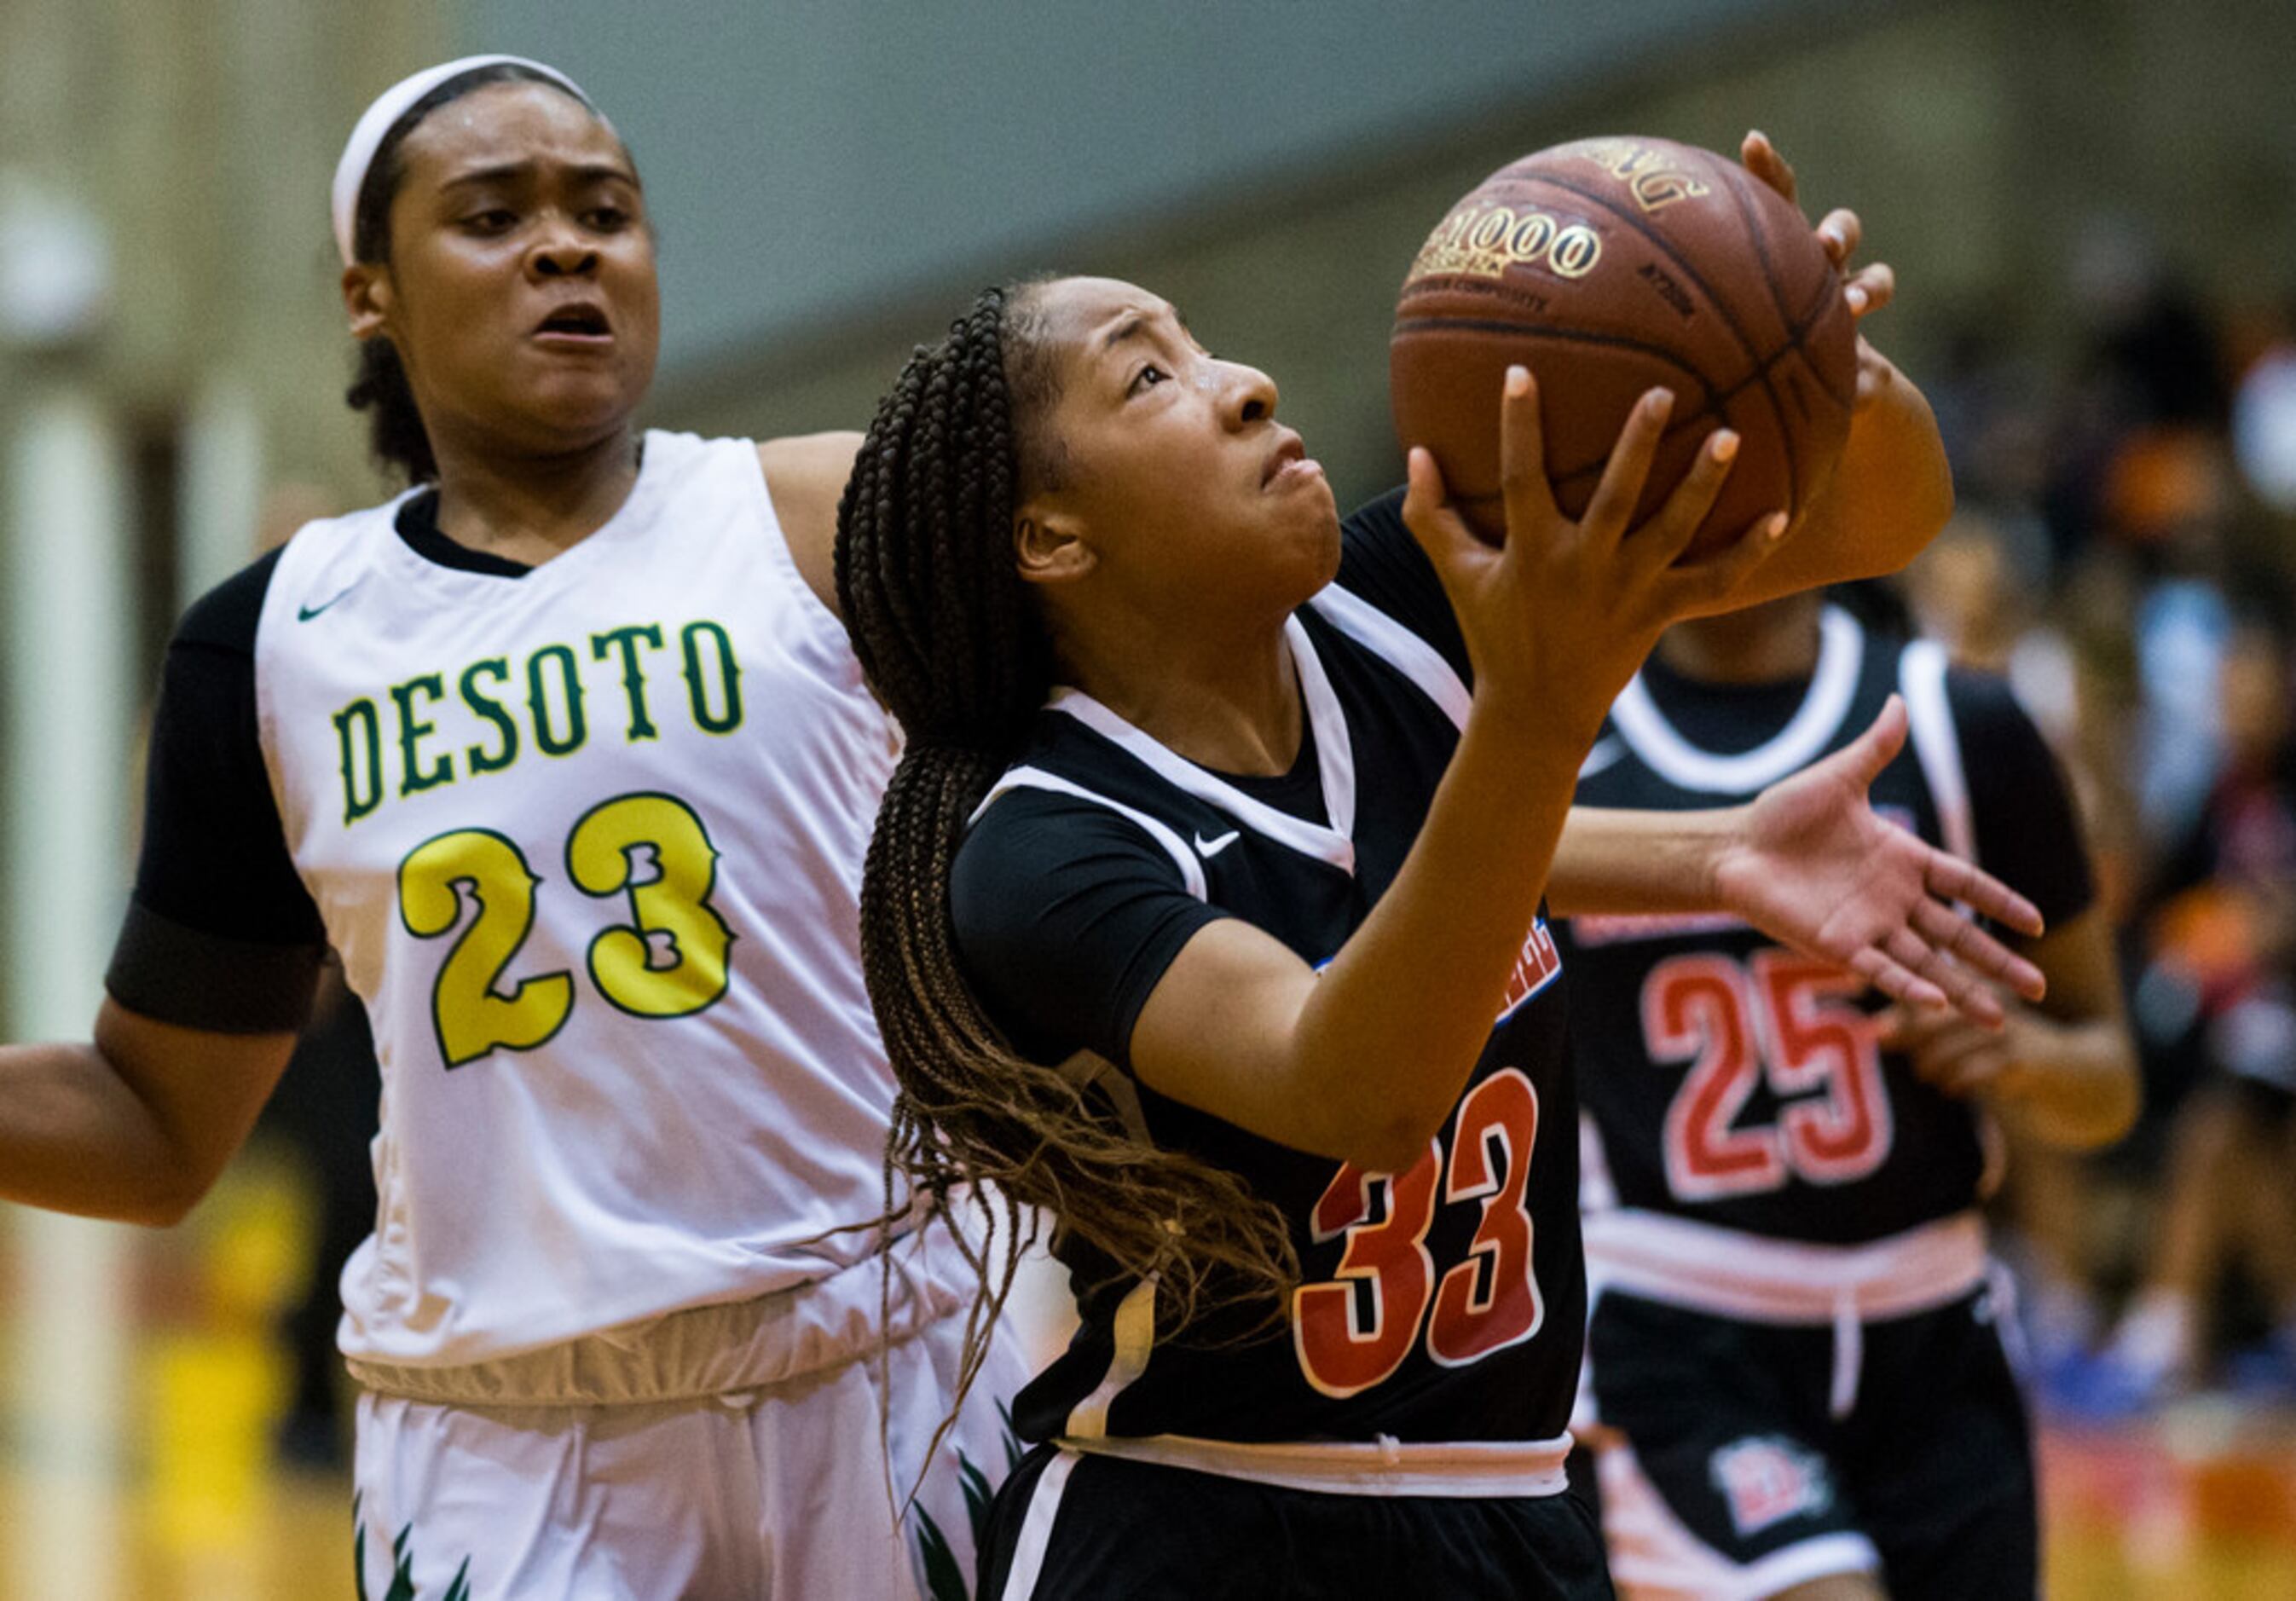 Duncanville's Nyah Wilson (33) goes up for a shot while DeSoto's Kendall Brown (23) defends...